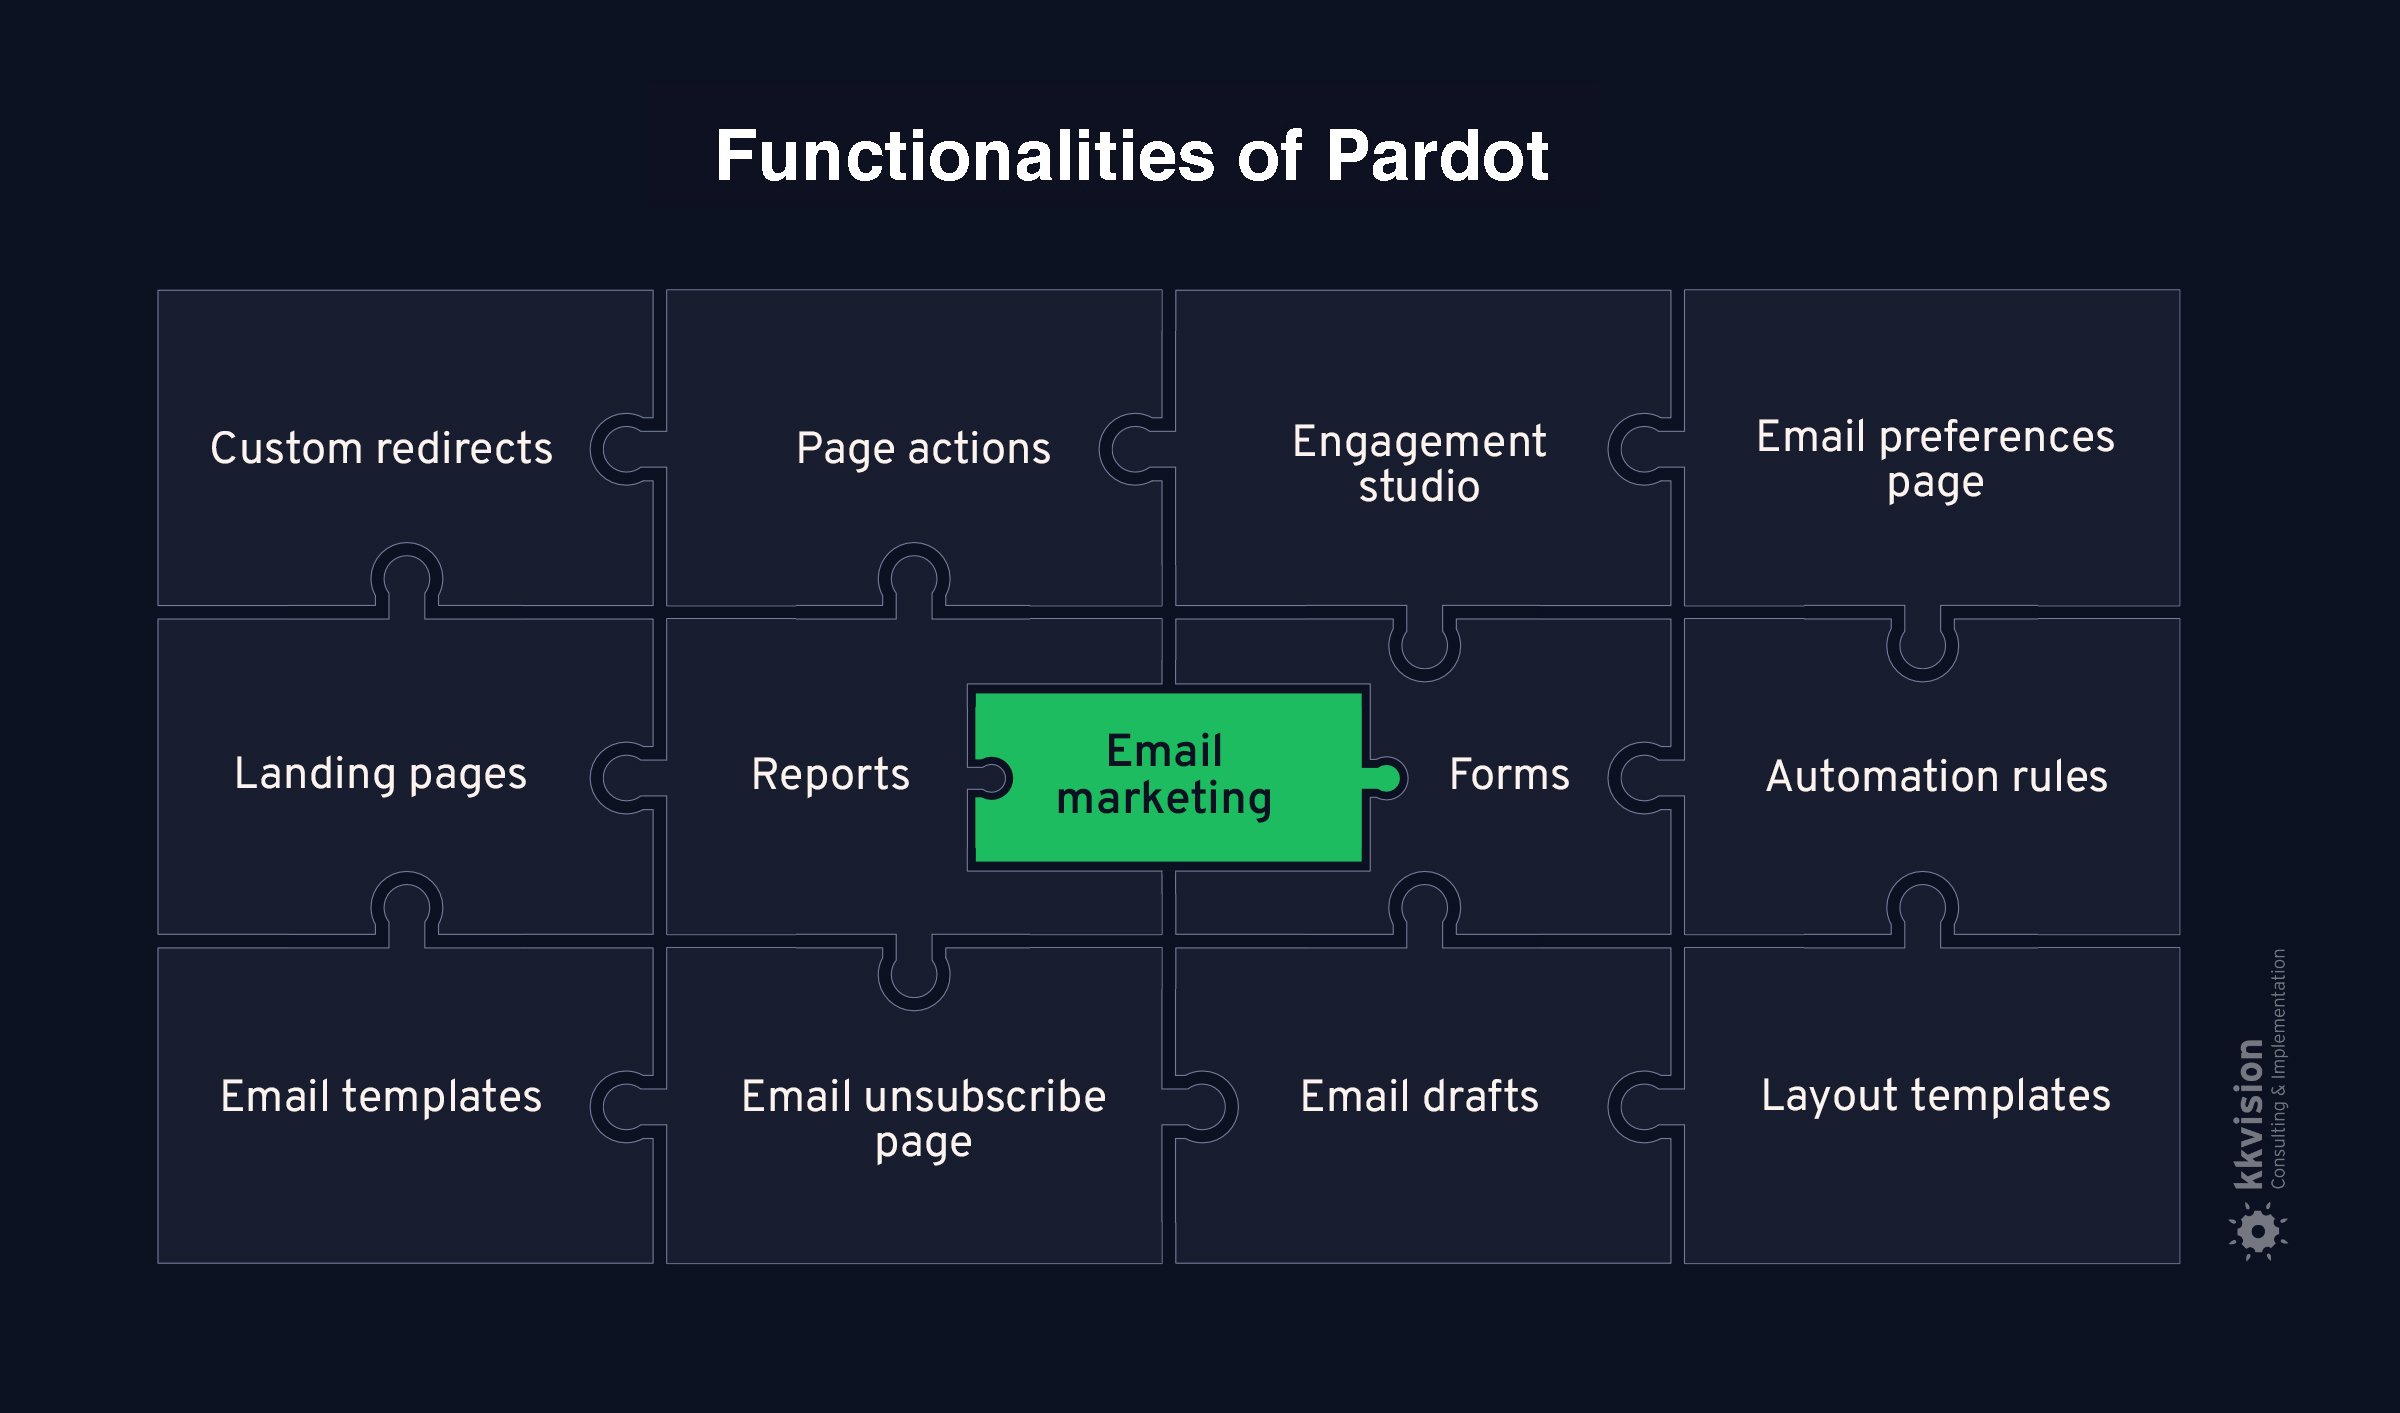 Pardot offers a variety of tools related to email marketing.